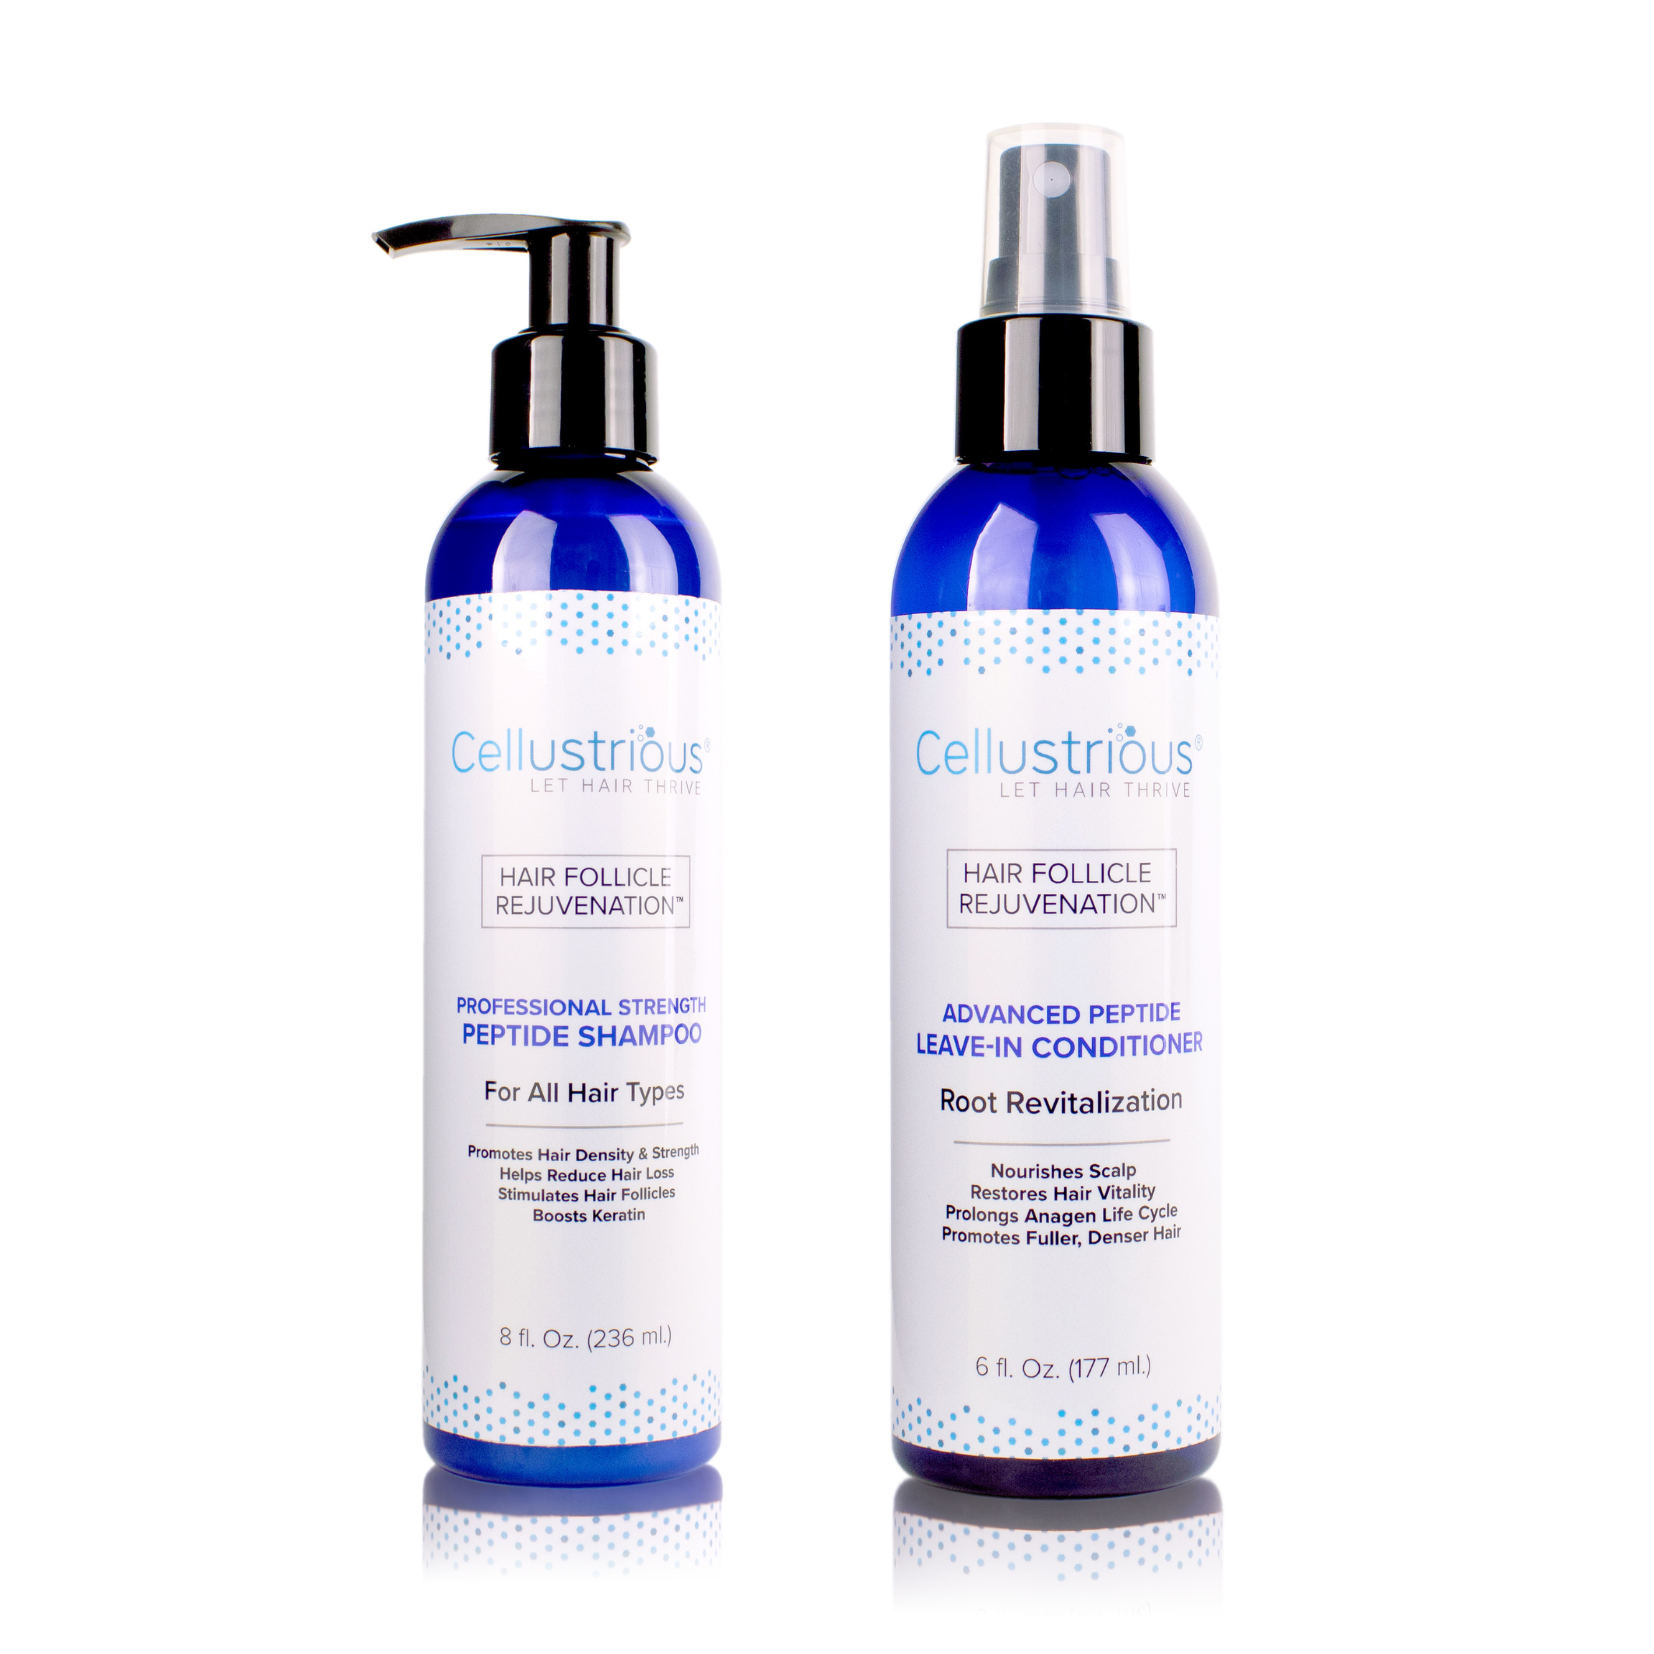 Cellustrious Advanced Peptide Shampoo and Leave-In Conditioner set